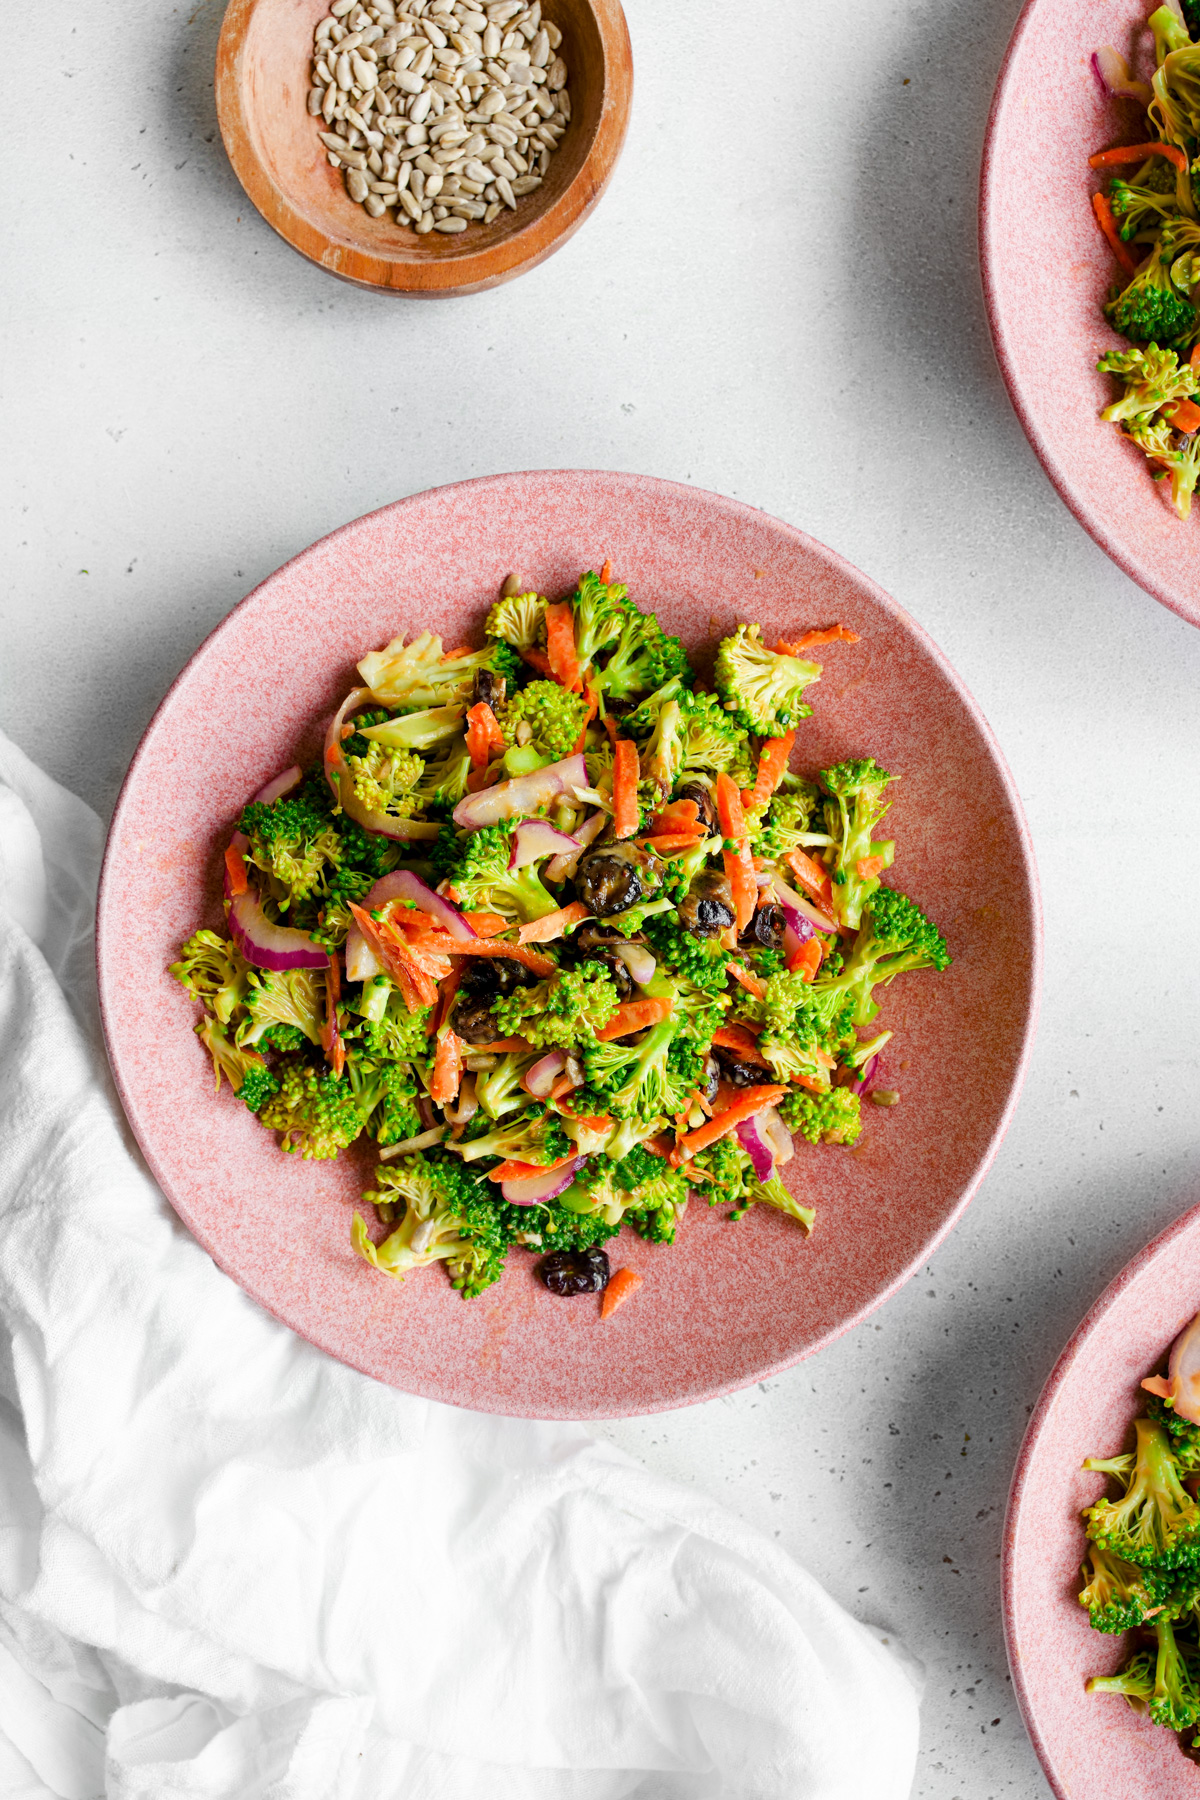 the broccoli crunch salad tossed in a serving bowl